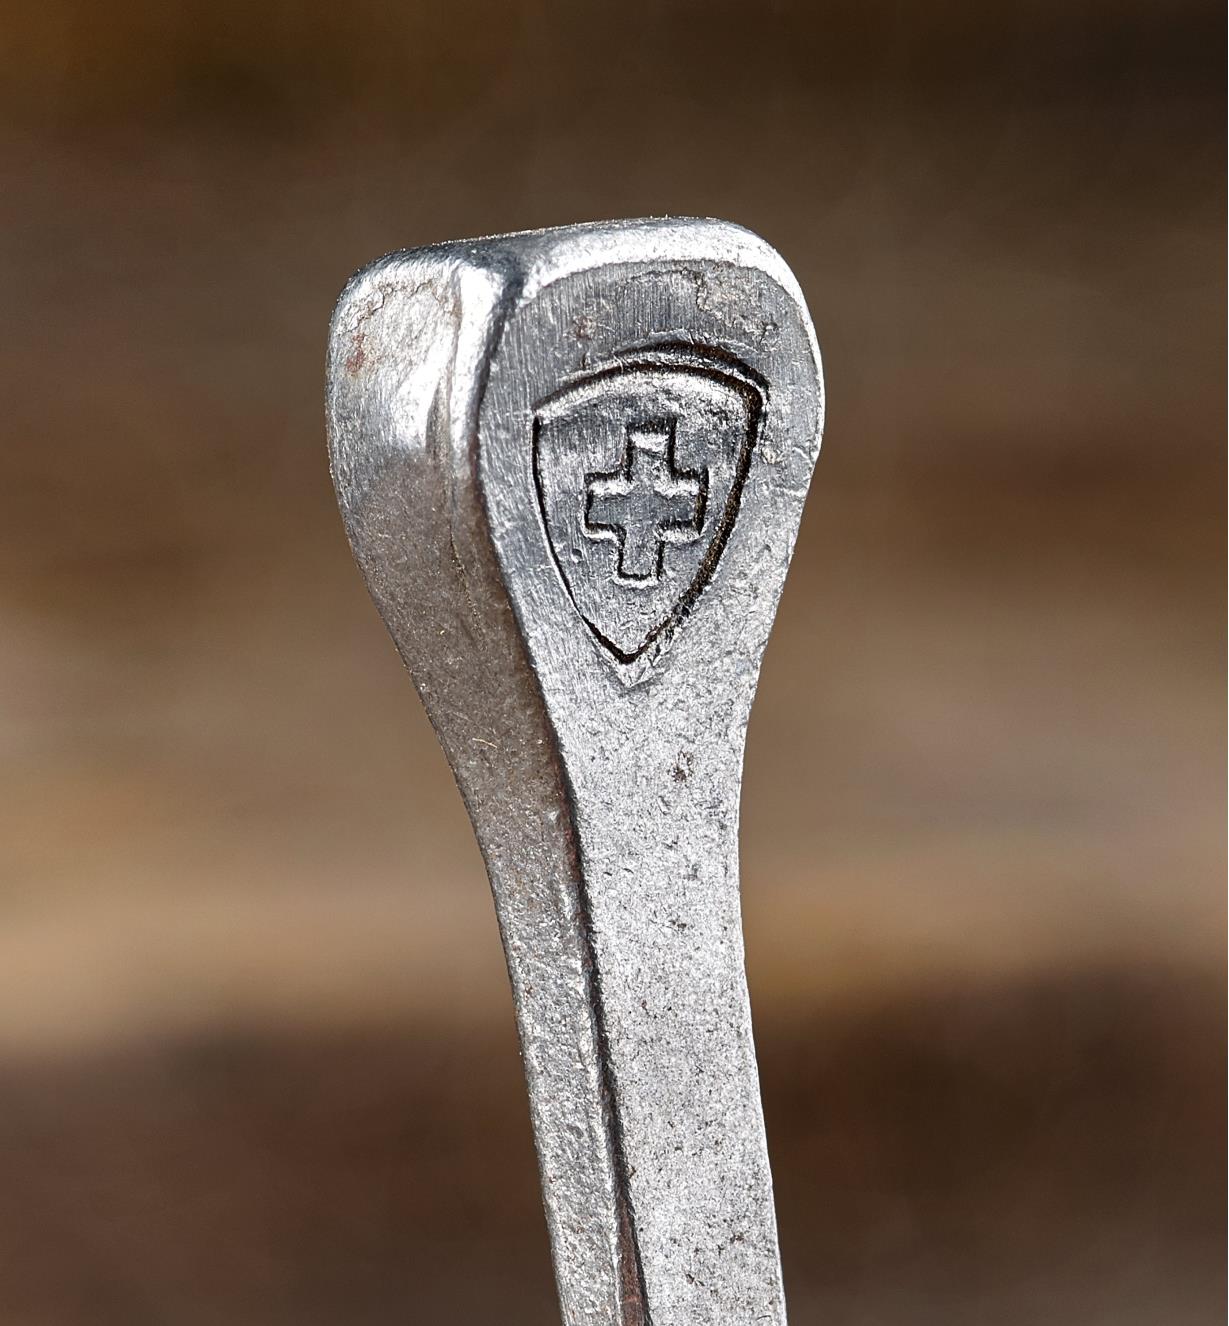 A close view of the Swiss cross and shield embossed on the side of a #10 horseshoe nail